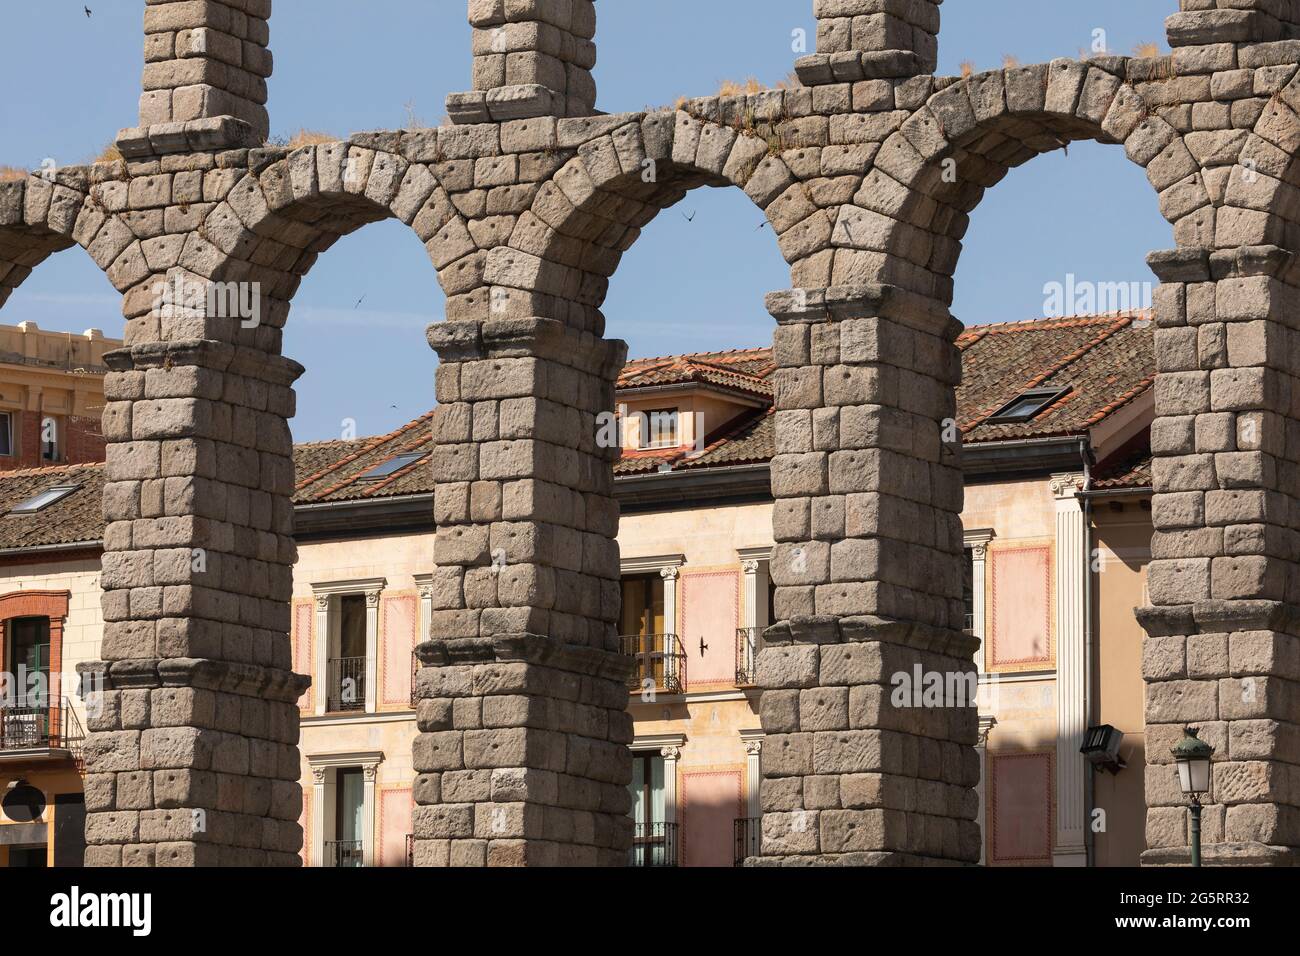 Detail of the granite arches of the Aqueduct of Segovia, crossed by swallows birds, next to the Plaza del Azoguejo Stock Photo